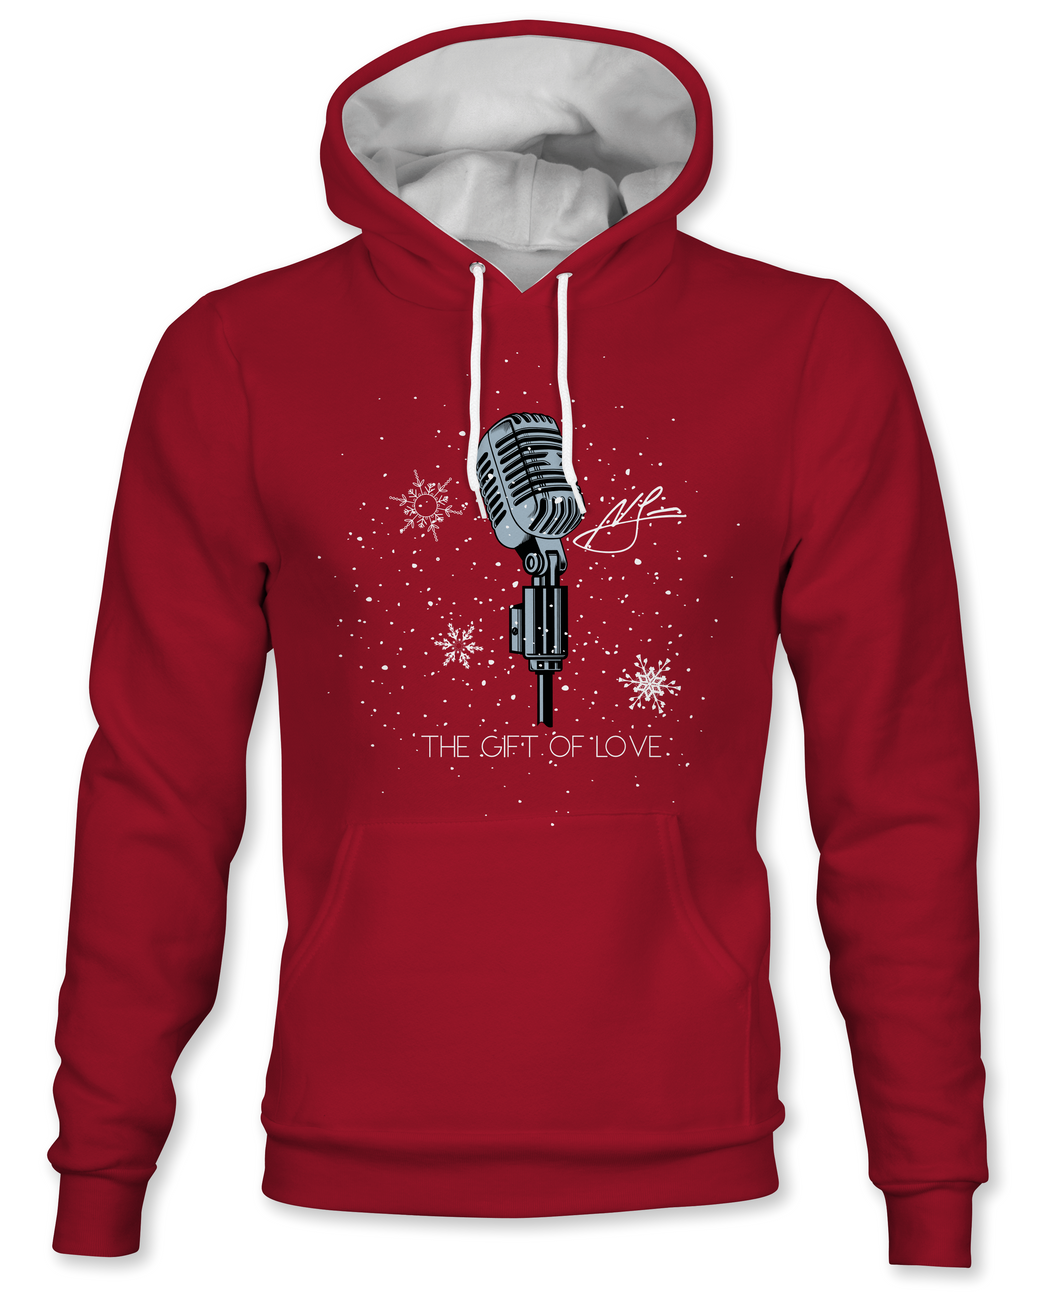 The Gift of Love Hoodie